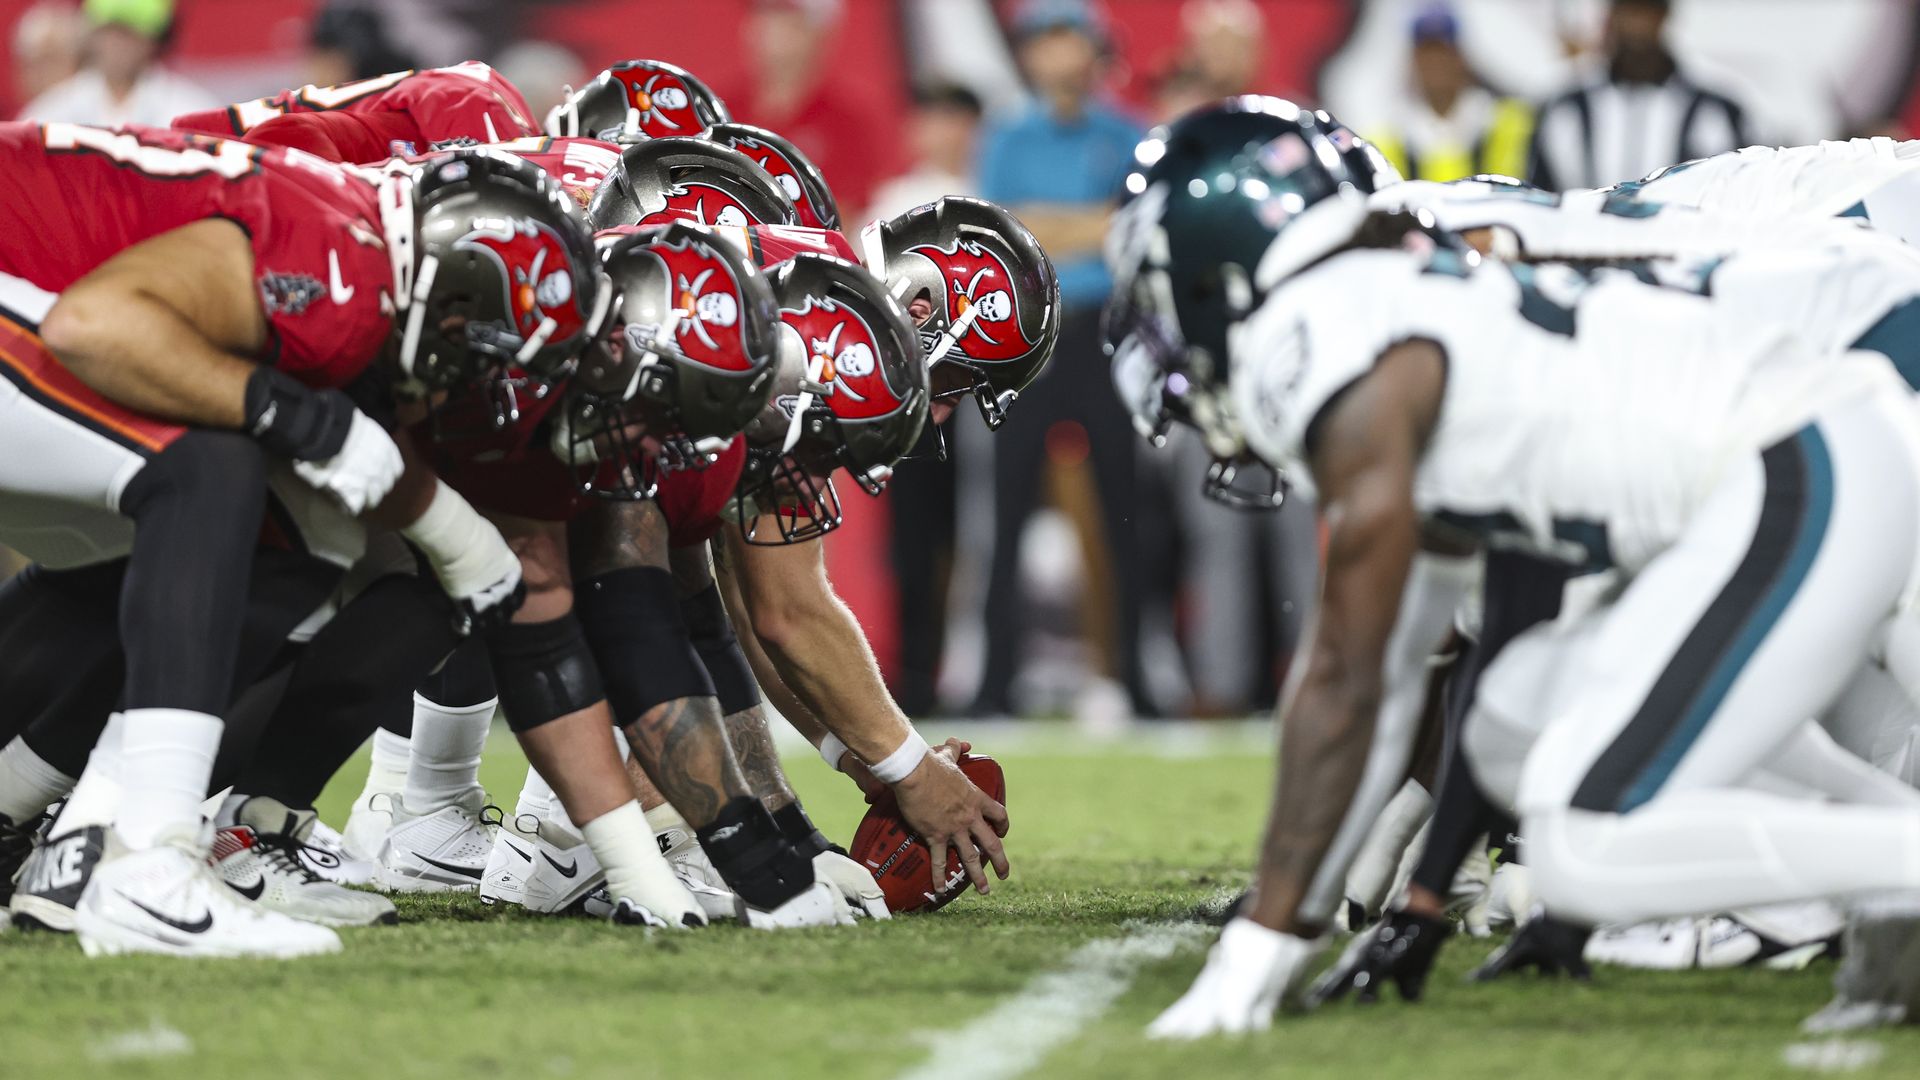 Tampa Bay Buccaneers offense lines up during an NFL football game against the Philadelphia Eagles at Raymond James Stadium on Sept. 25, 2023 in Tampa, Florida.